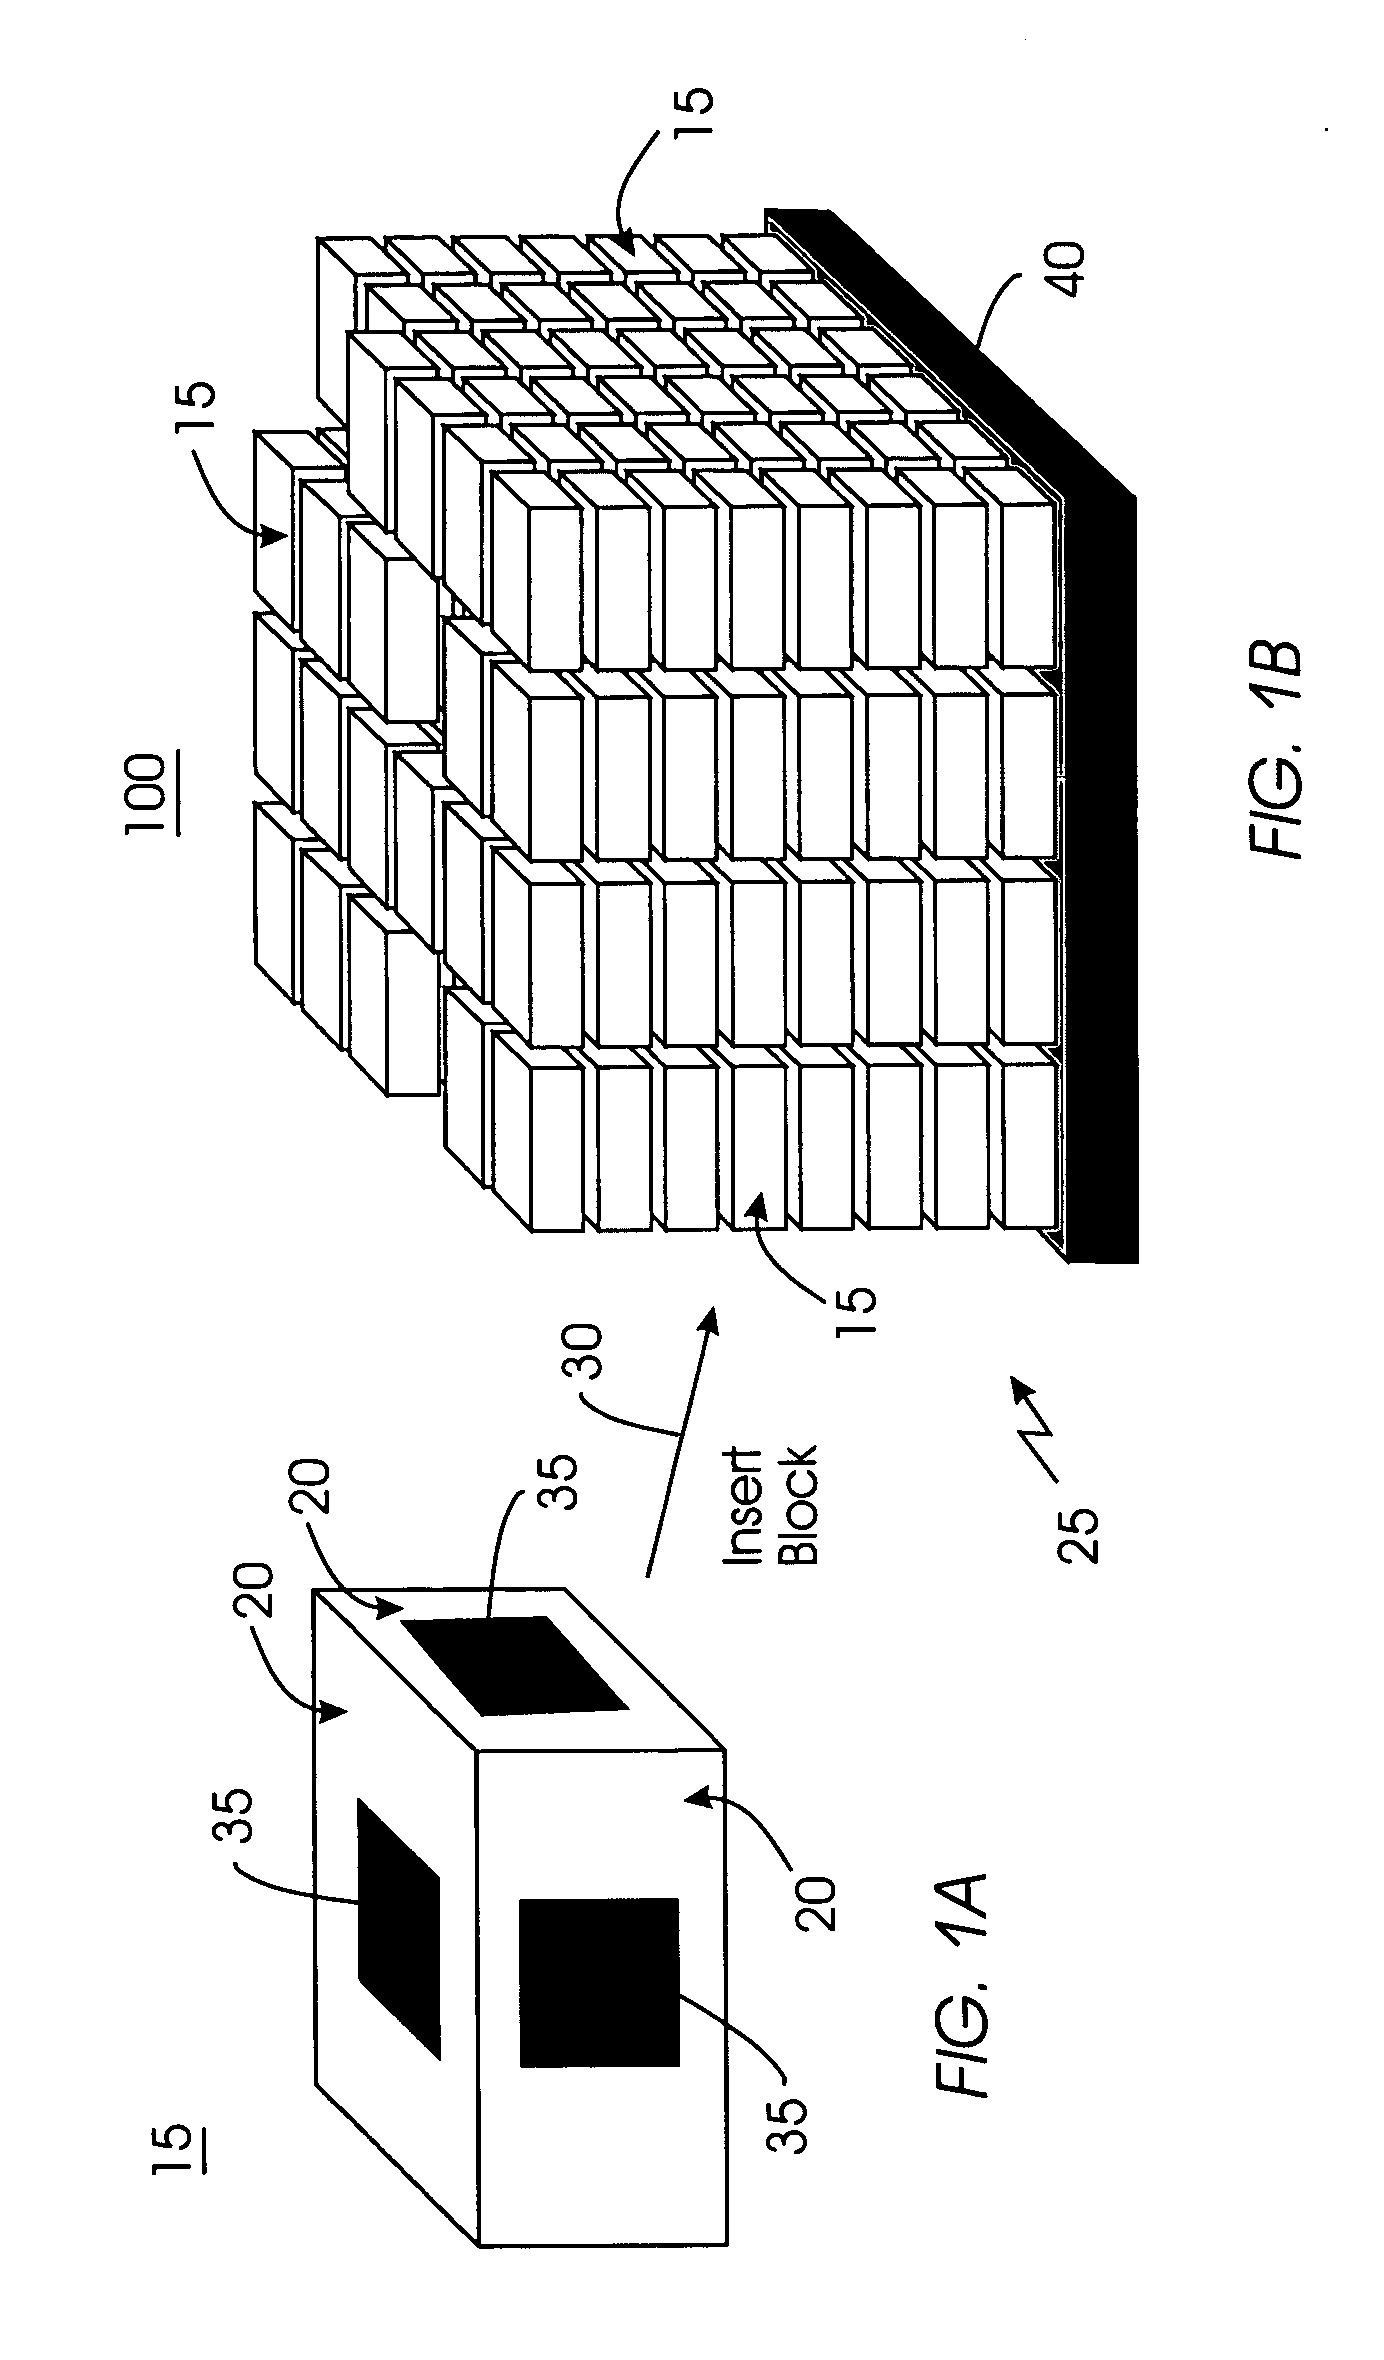 Mechanism for self-alignment of communications elements in a modular electronic system